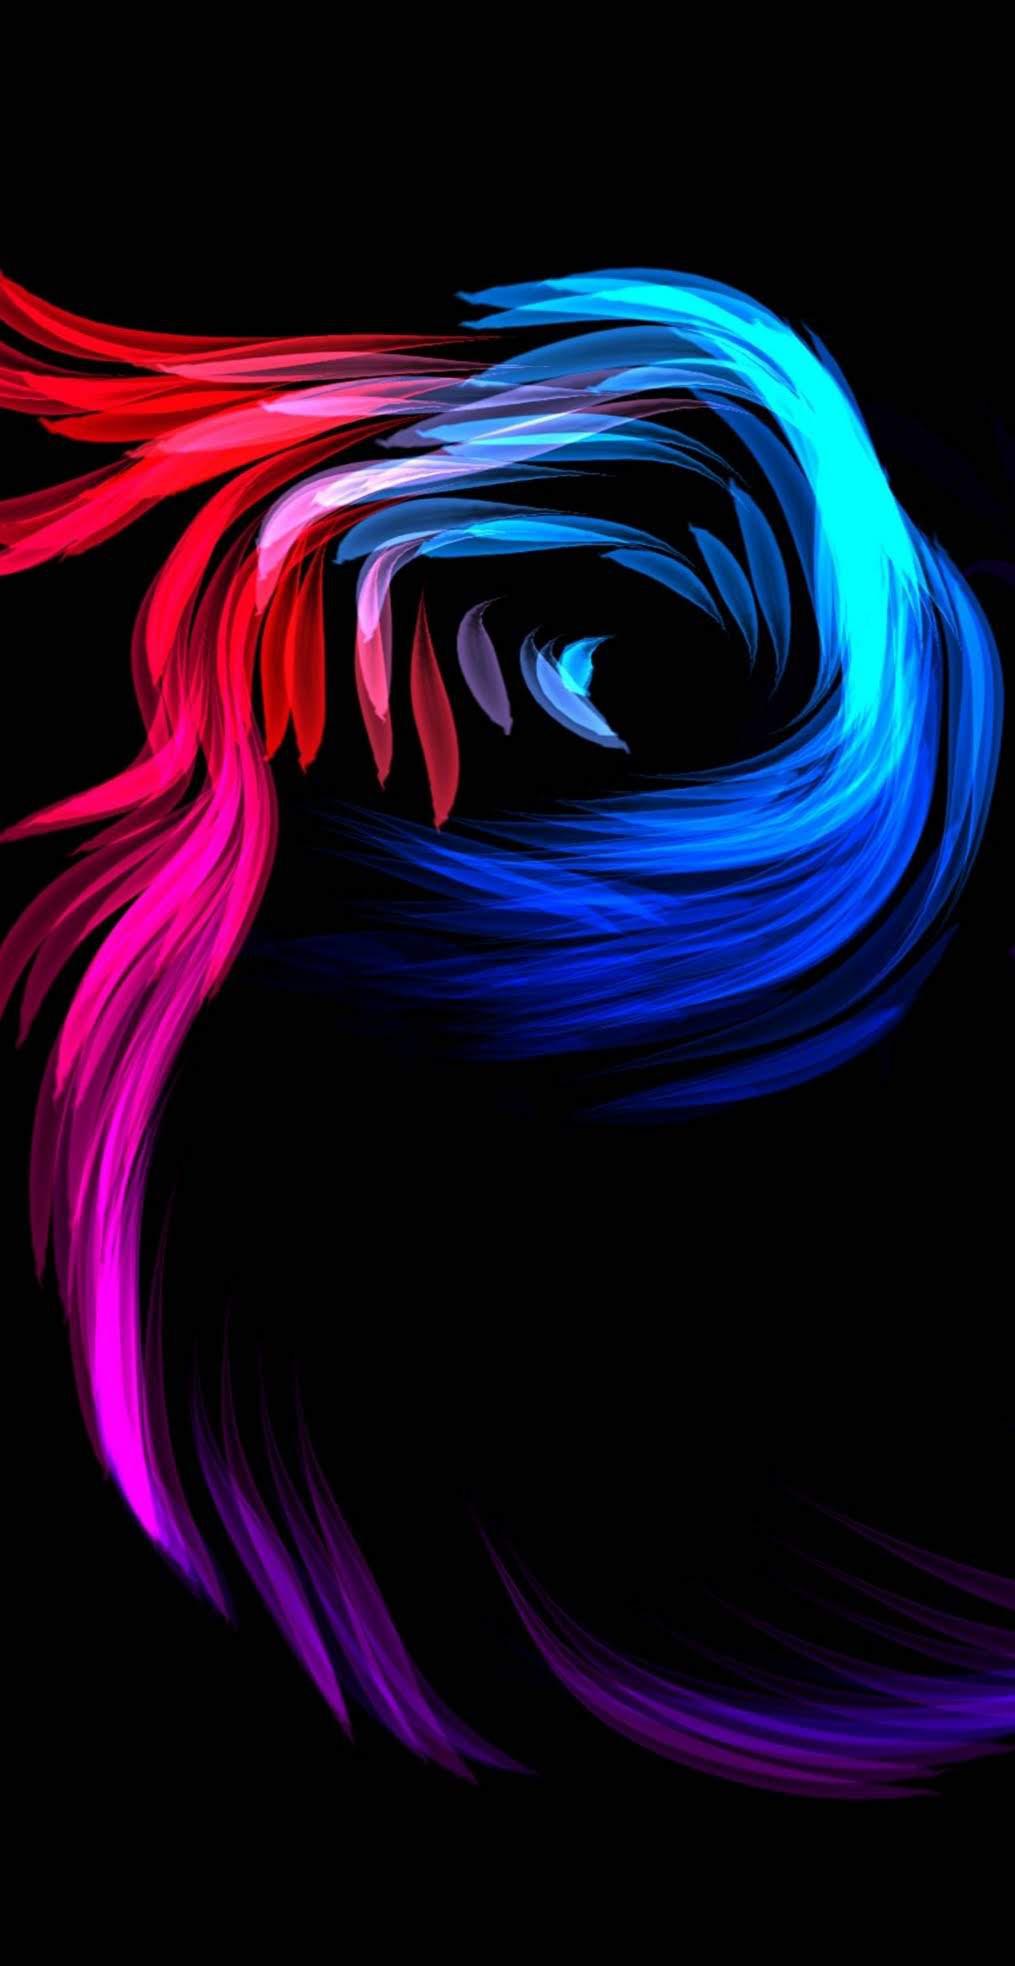 Amoled wallpapers are the best it looks coolalso helps the battery a lot rmobilewallpaper